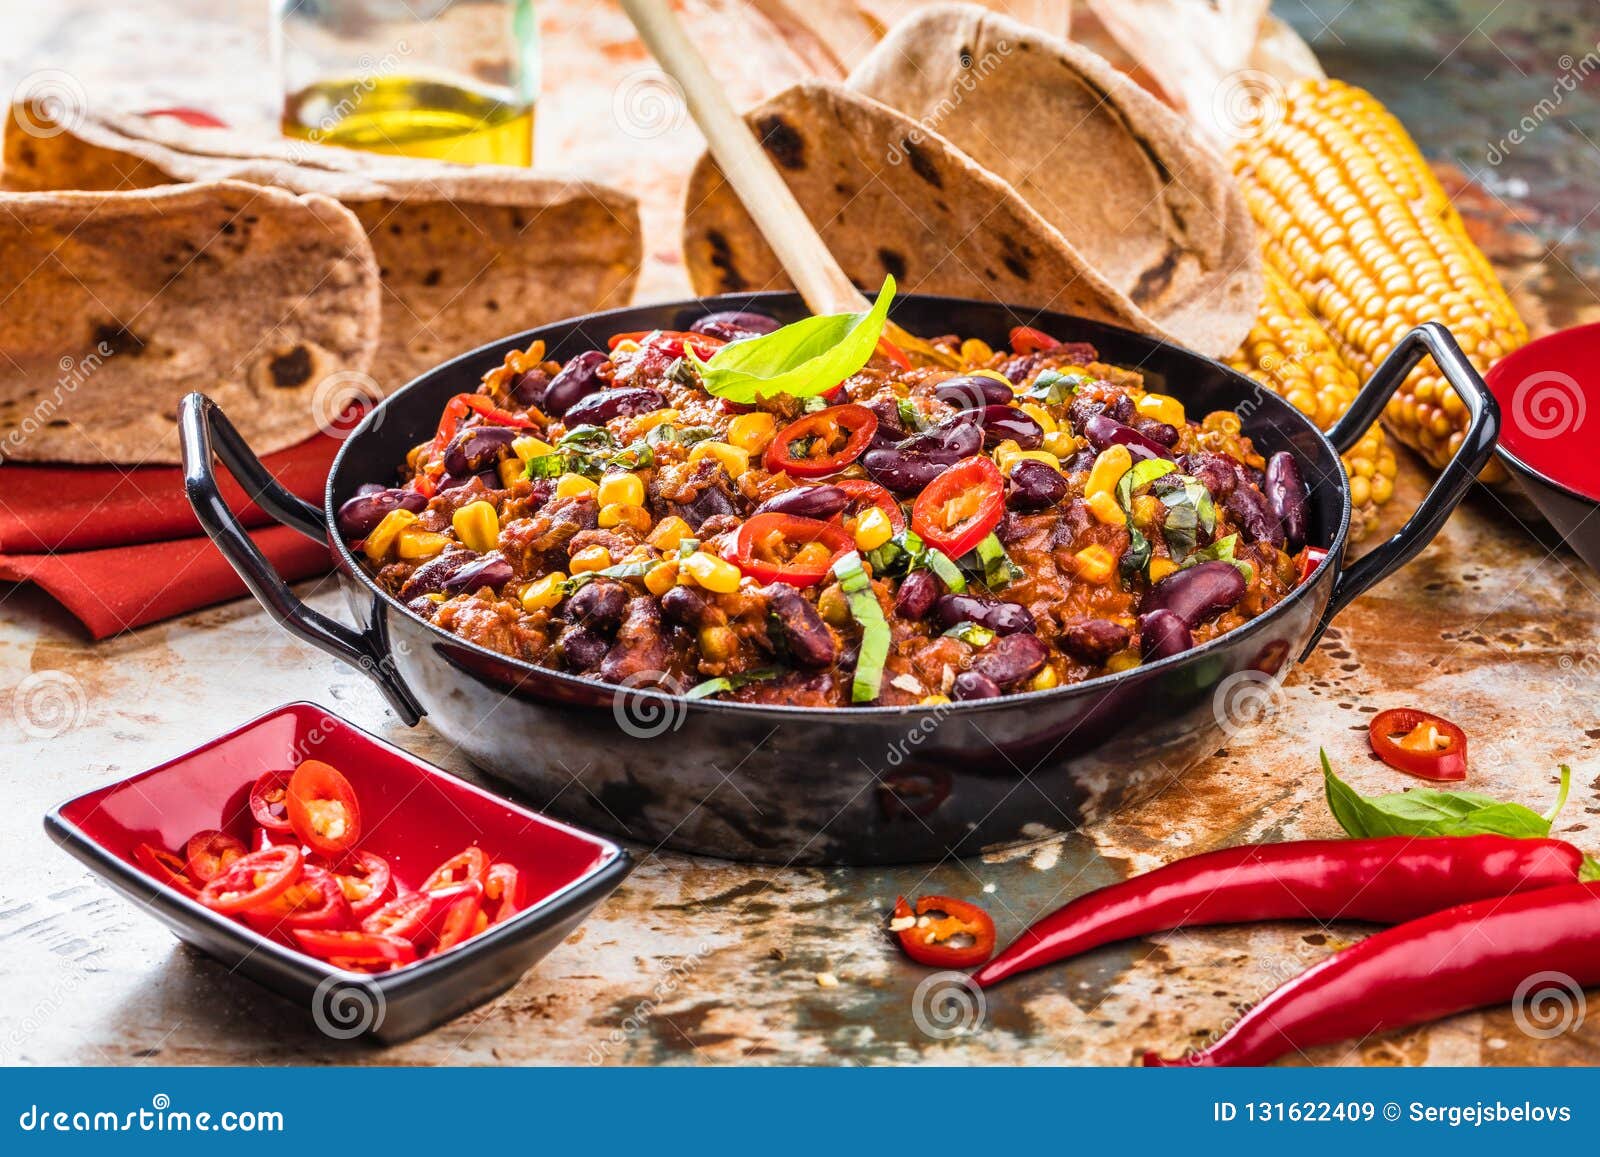 Chili Con Carne in a Clay Bowl on a Concrete or Stone Rustic Background ...